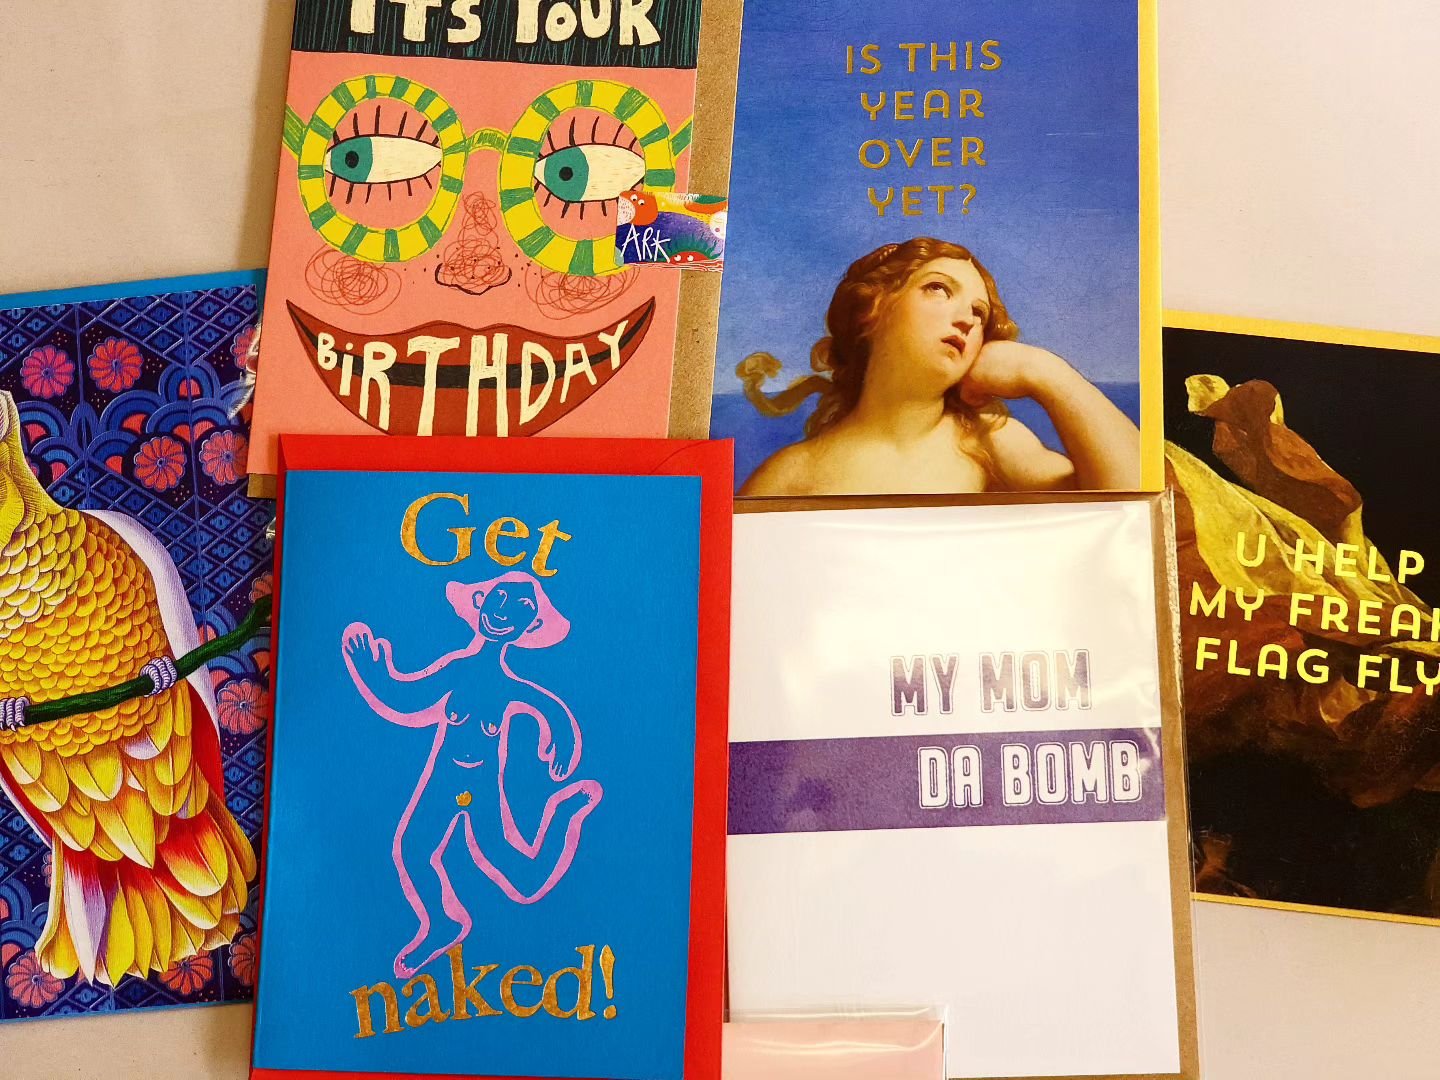 Did you know we have so many greeting cards in stock that it's almost hard to look through them all? Yes that is a challenge, come see if you're up to the task of finding the perfect card.